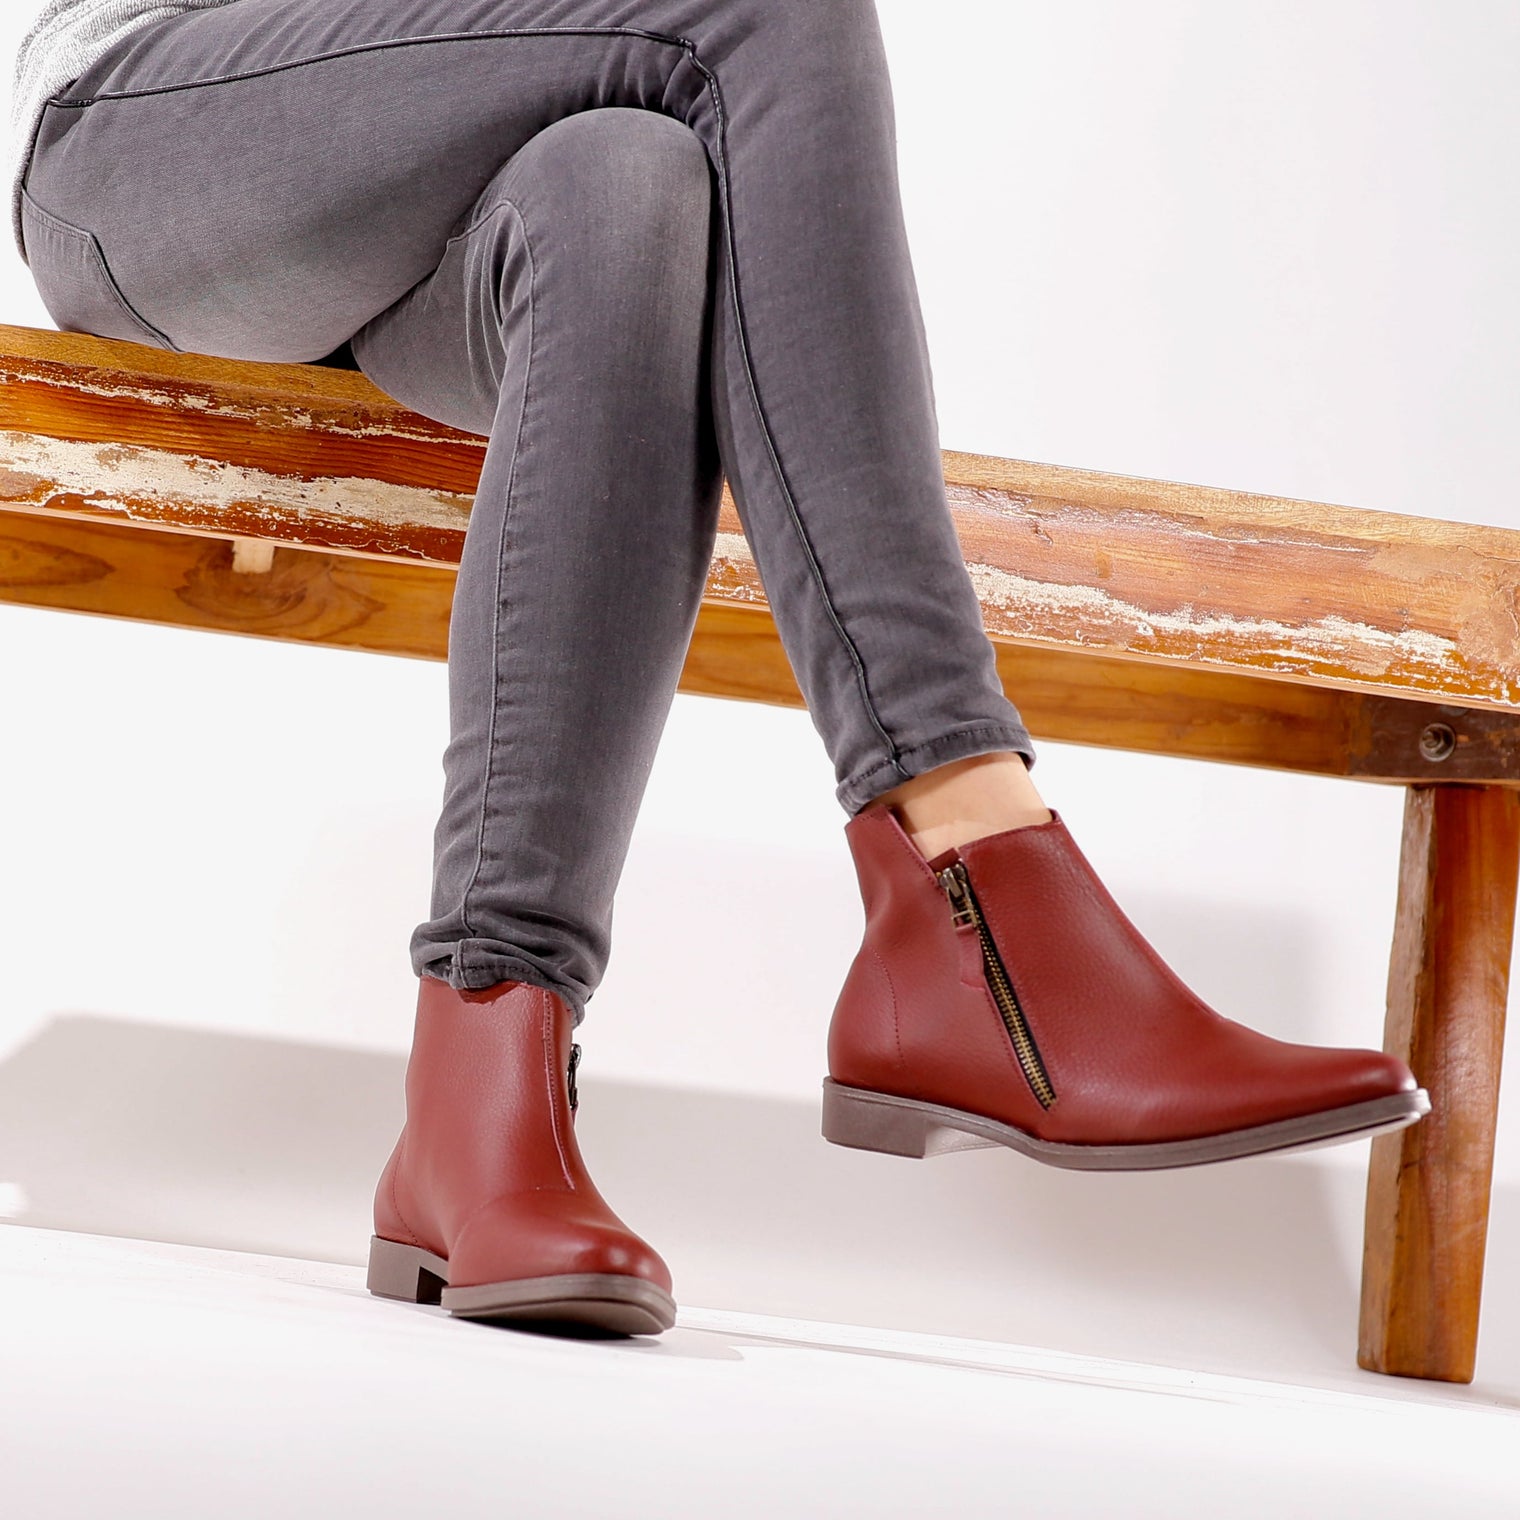 women's red leather booties